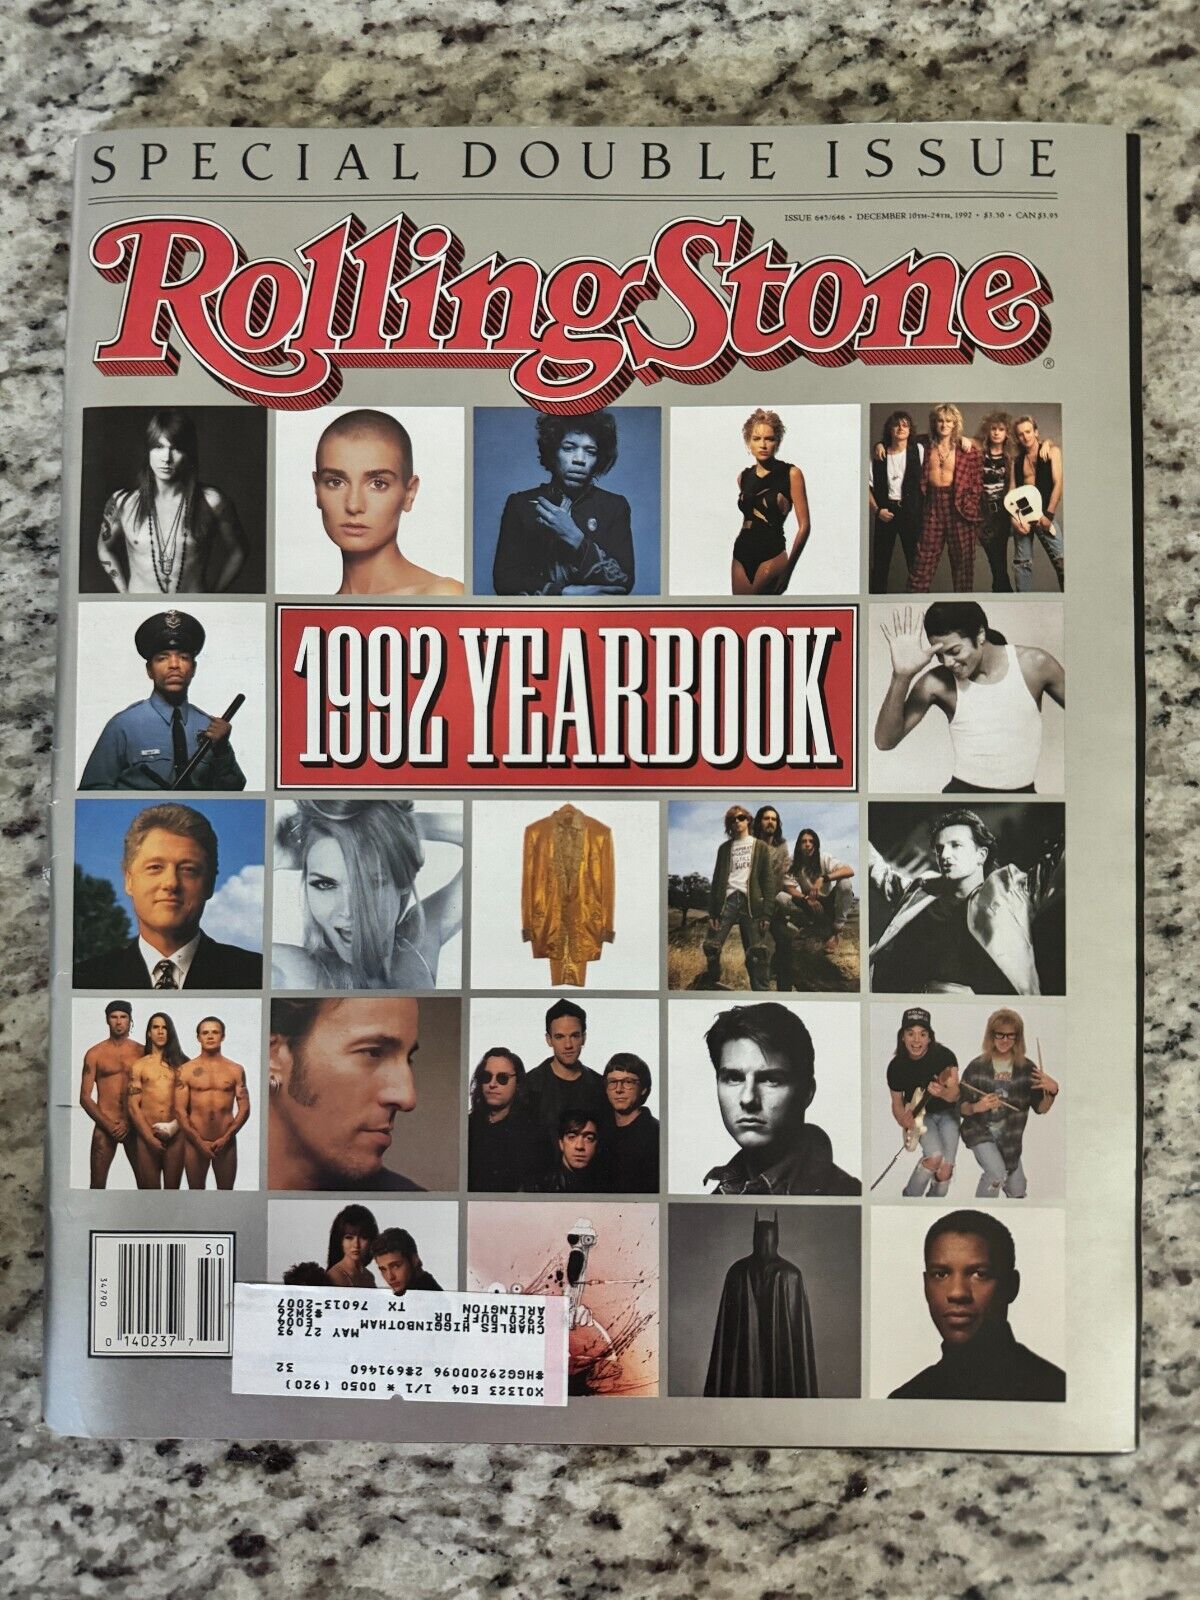 Rolling Stone Magazine Issue 645/646, December 10-24, 1992, 1992 Yearbook